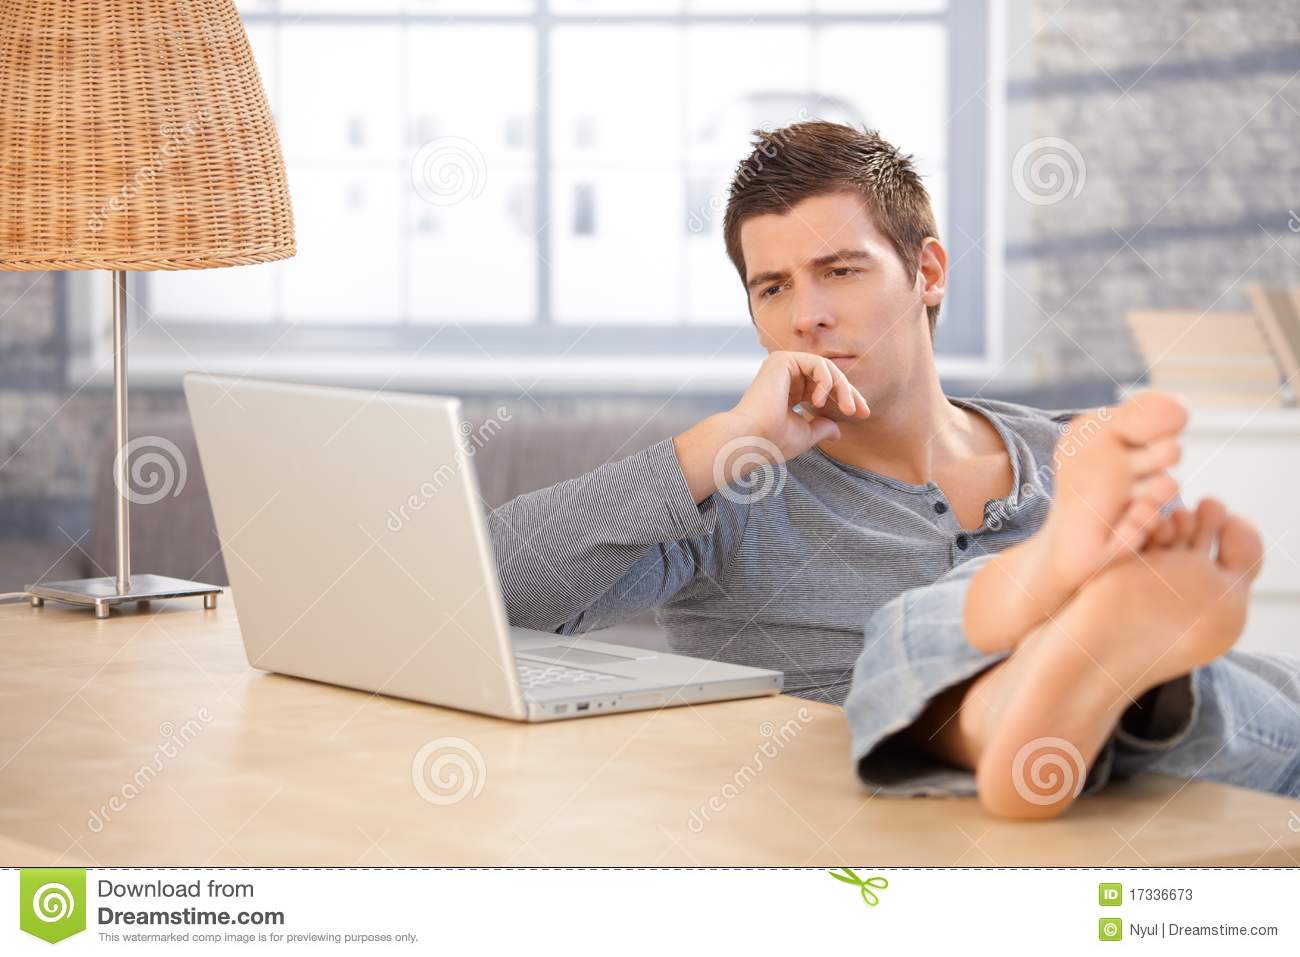 Young Man Sitting At Home With Bare Feet On Desk Thinking Looking At